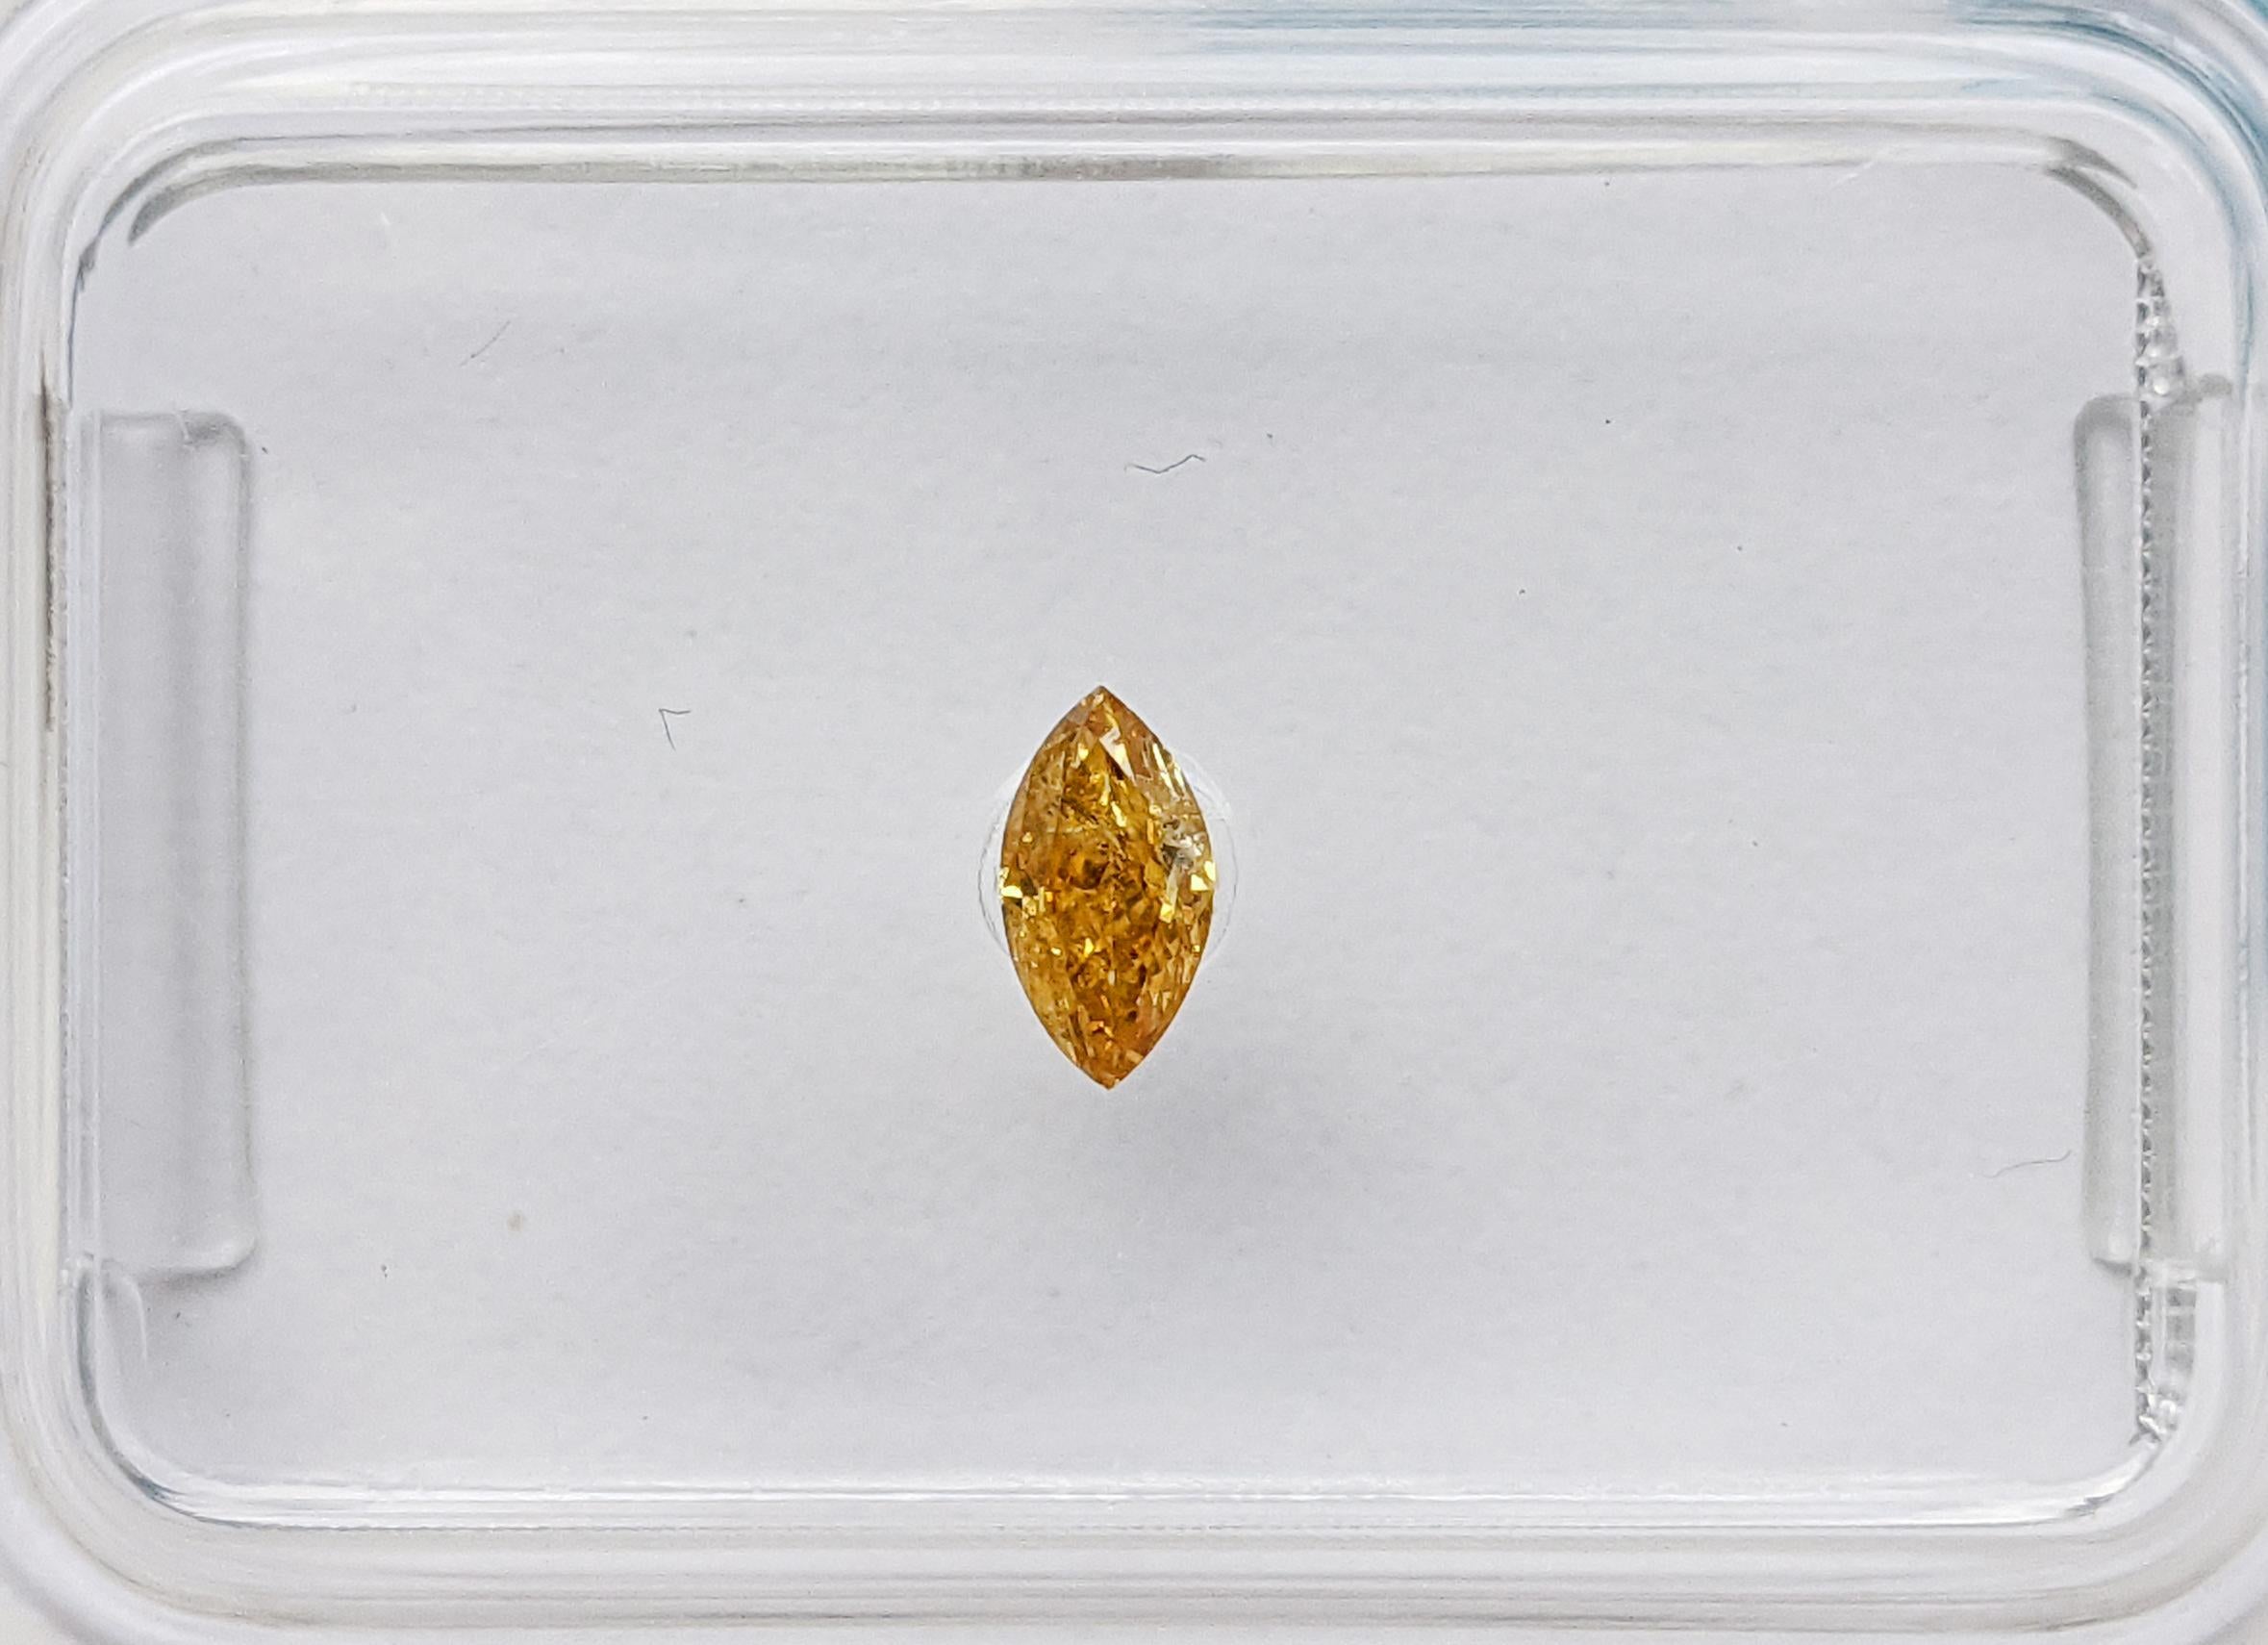 Introducing a vibrant 0.14ct Fancy Vivid Yellowish Orange diamond, certified by IGI. Its warm hue adds a touch of brightness to any setting. With a Marquise shape, it offers a unique charm, ideal for those seeking standout jewelry.

No Reserve